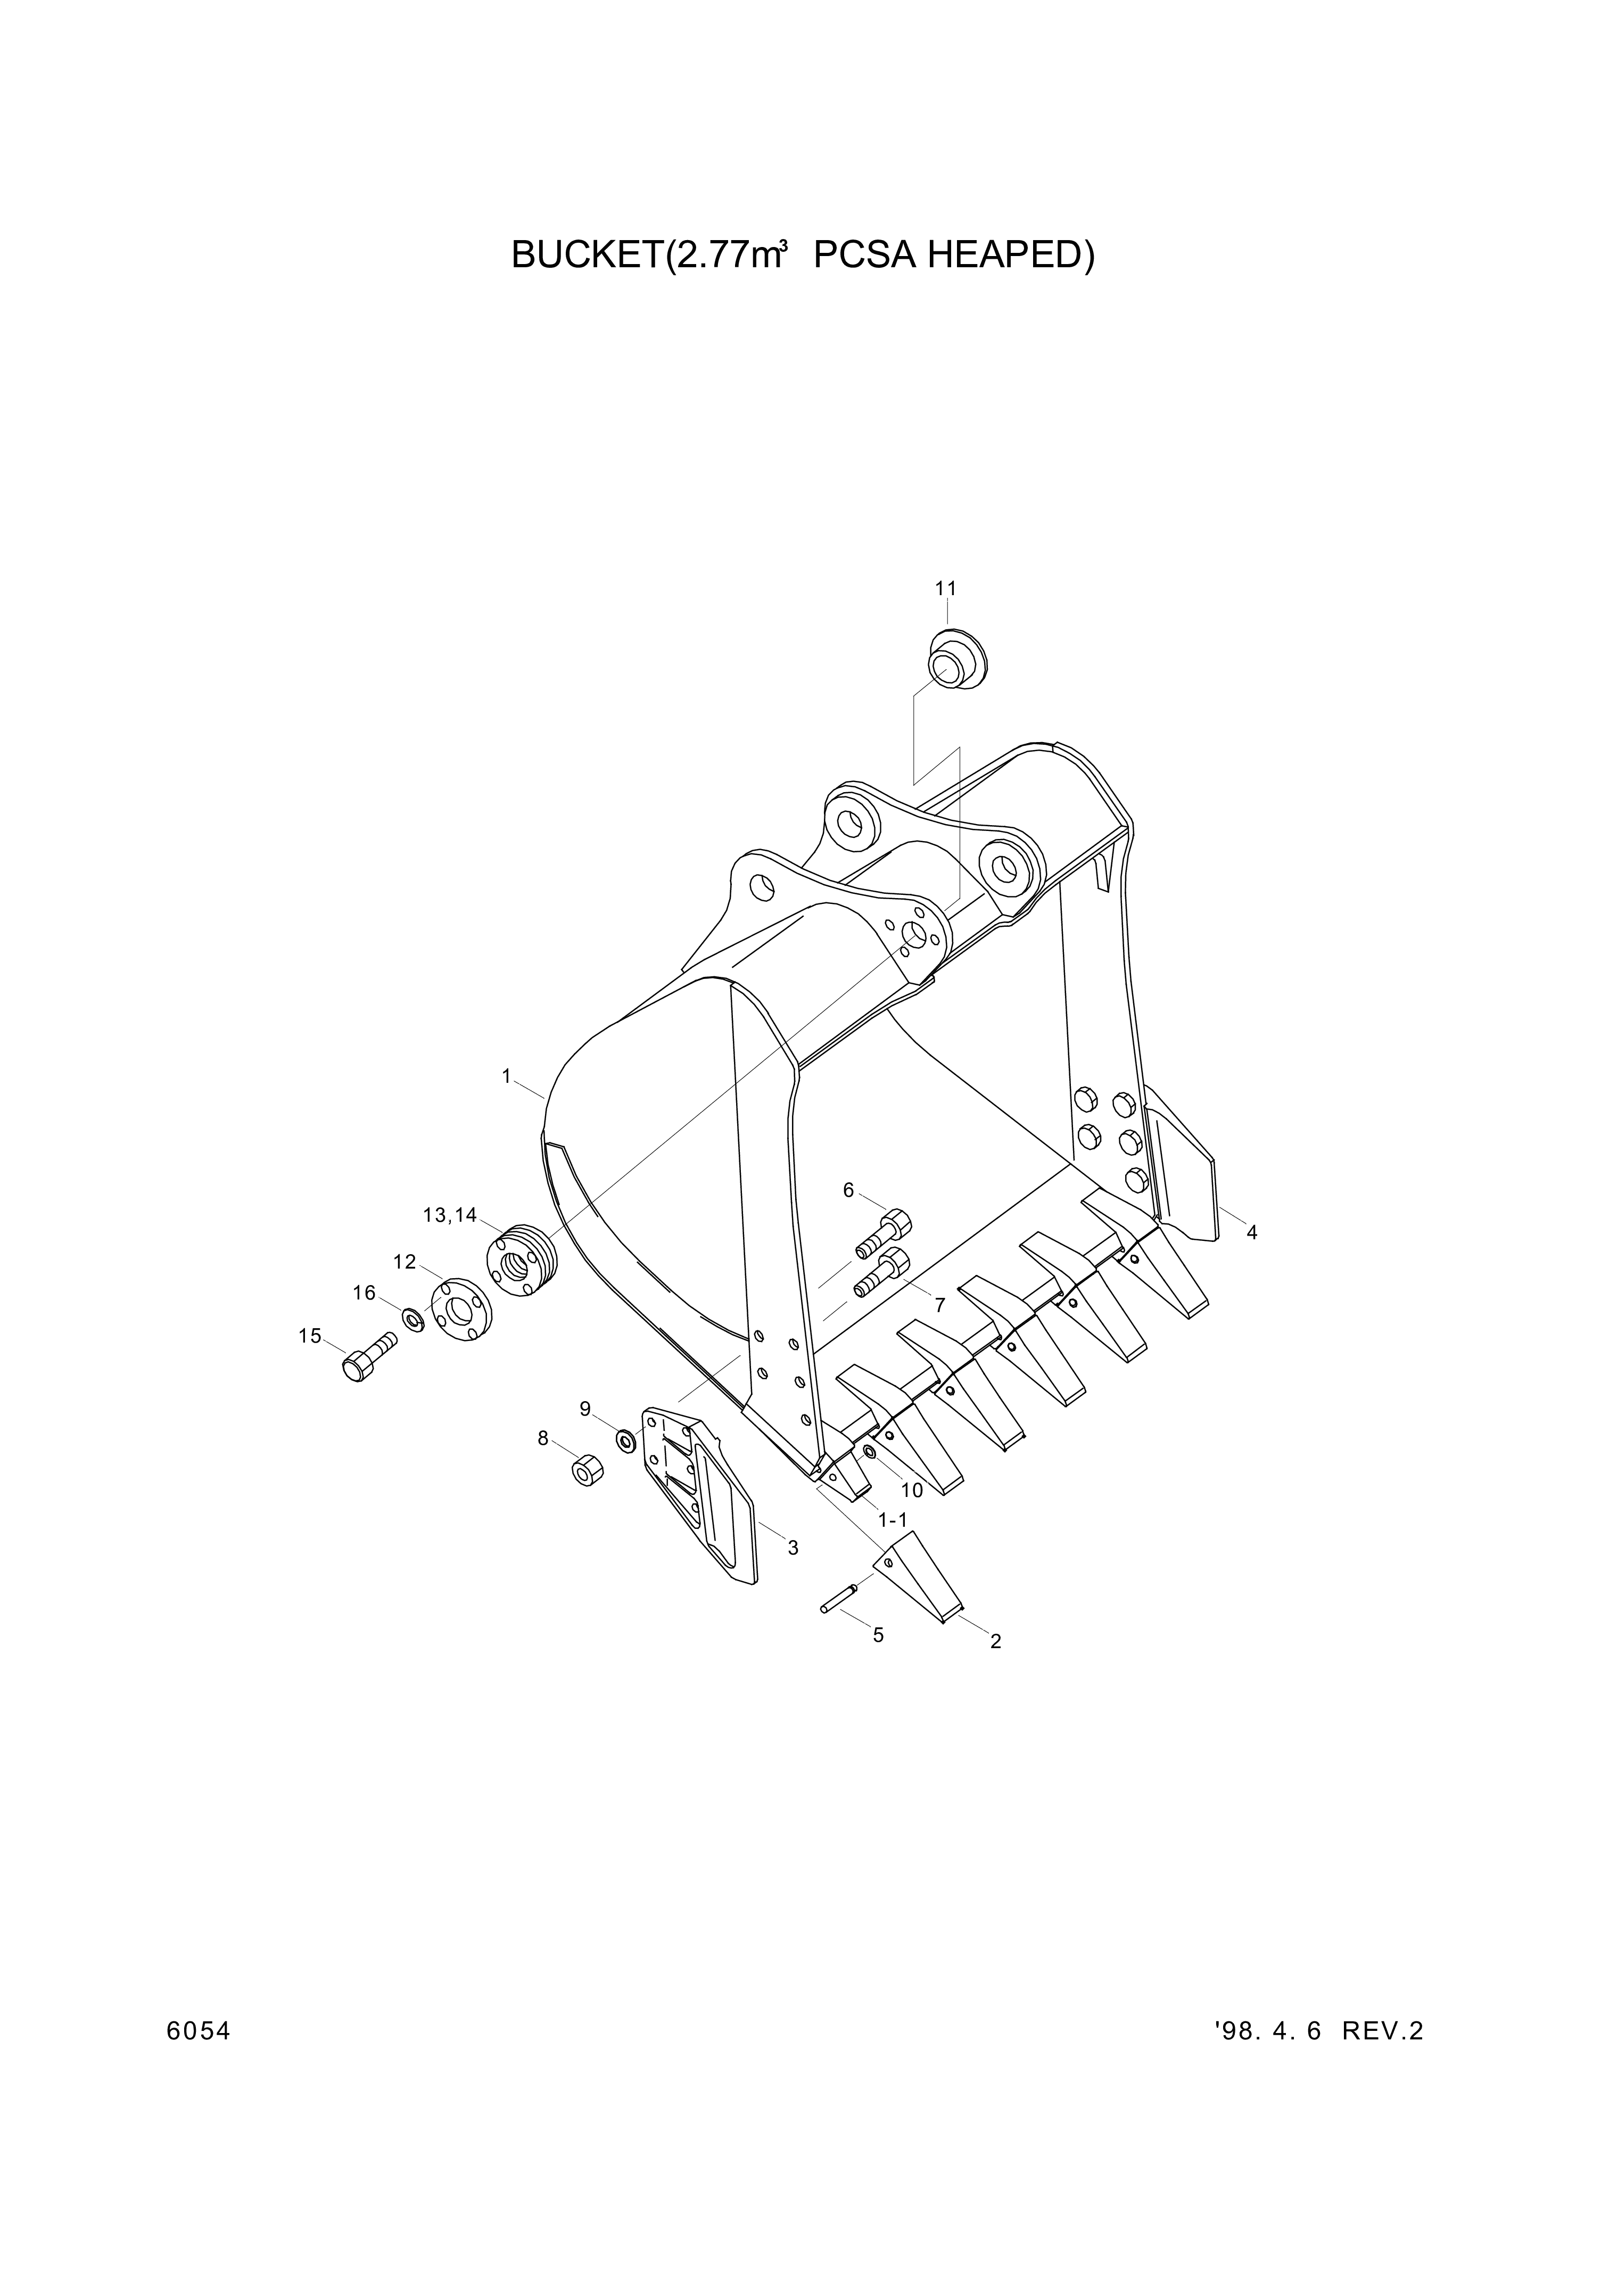 drawing for Hyundai Construction Equipment 61E7-0105 - PIN-TOOTH (figure 4)